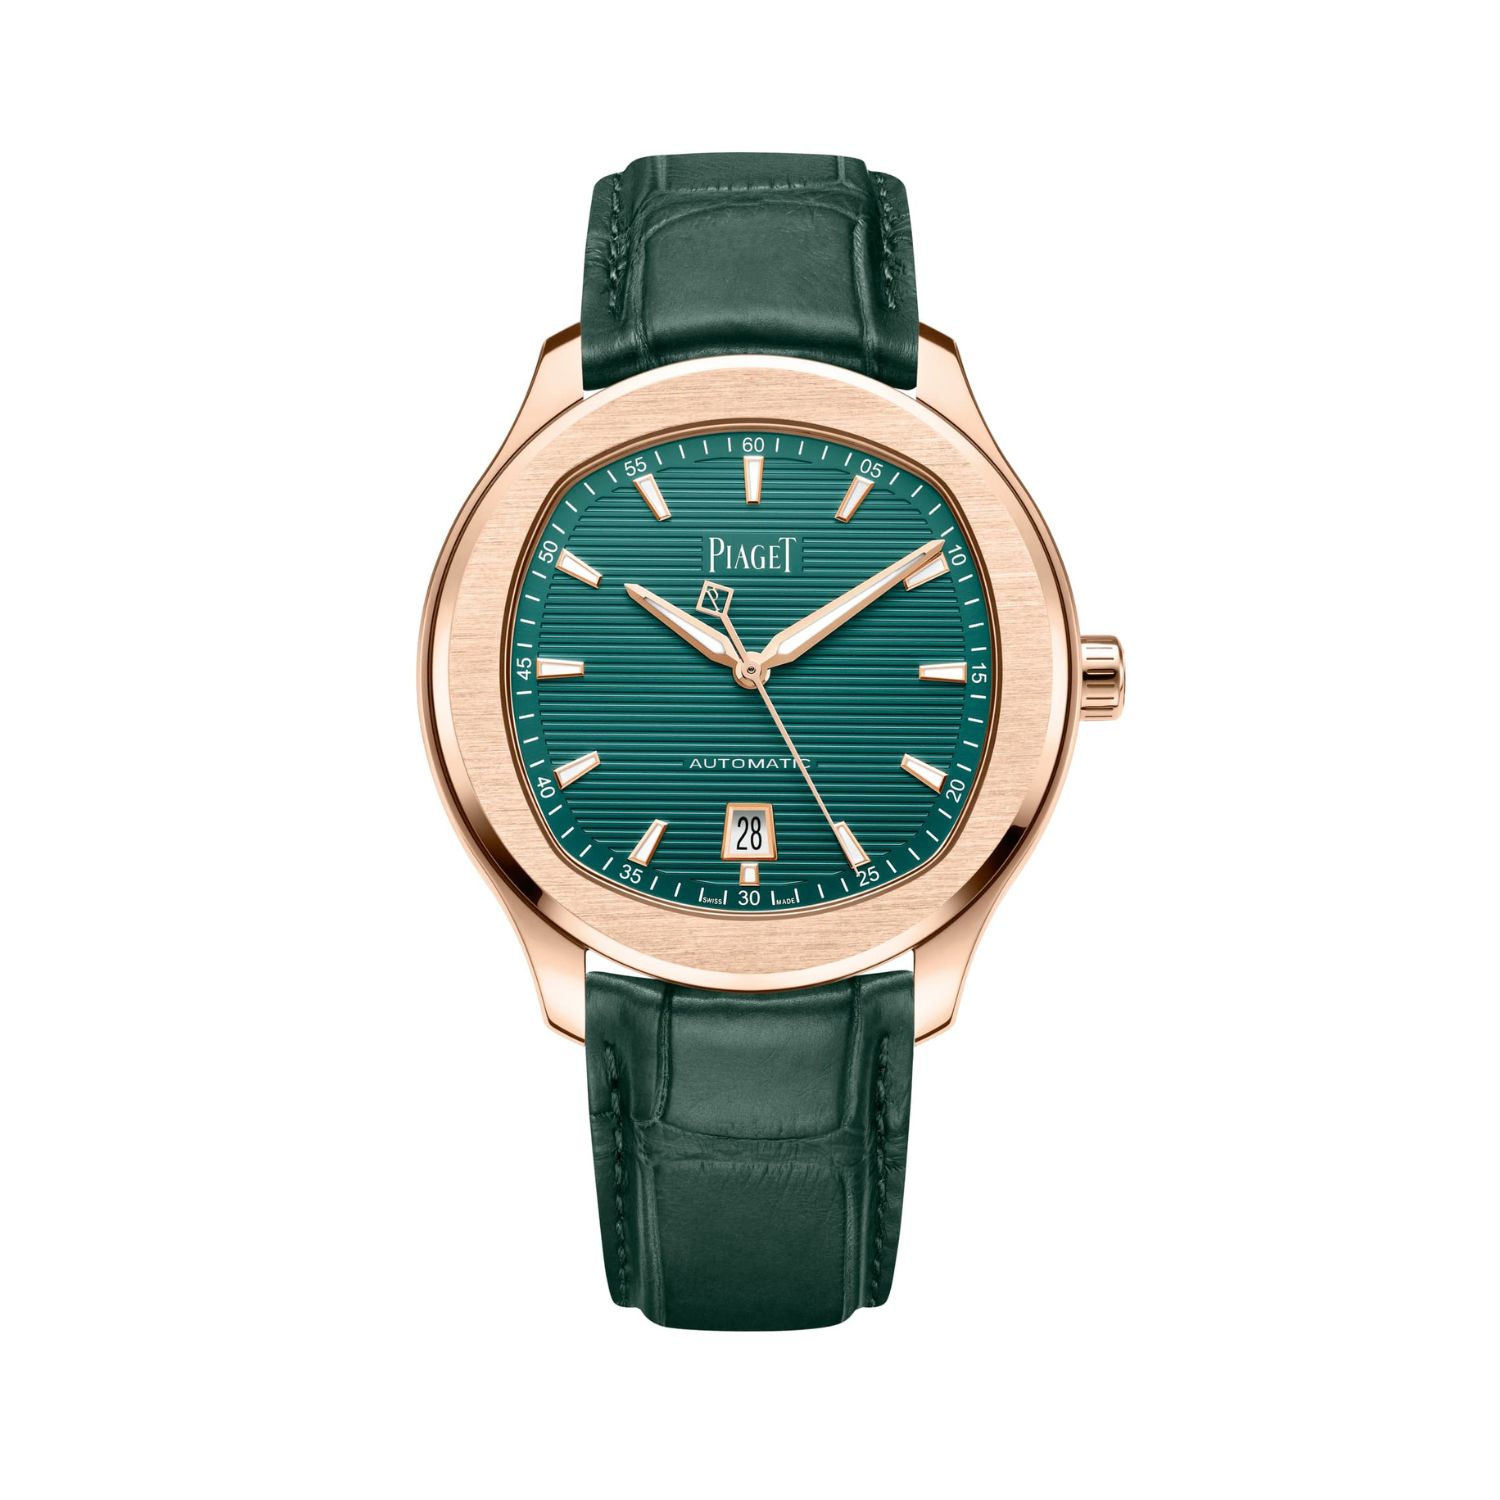 Montre piaget polo date - Piaget